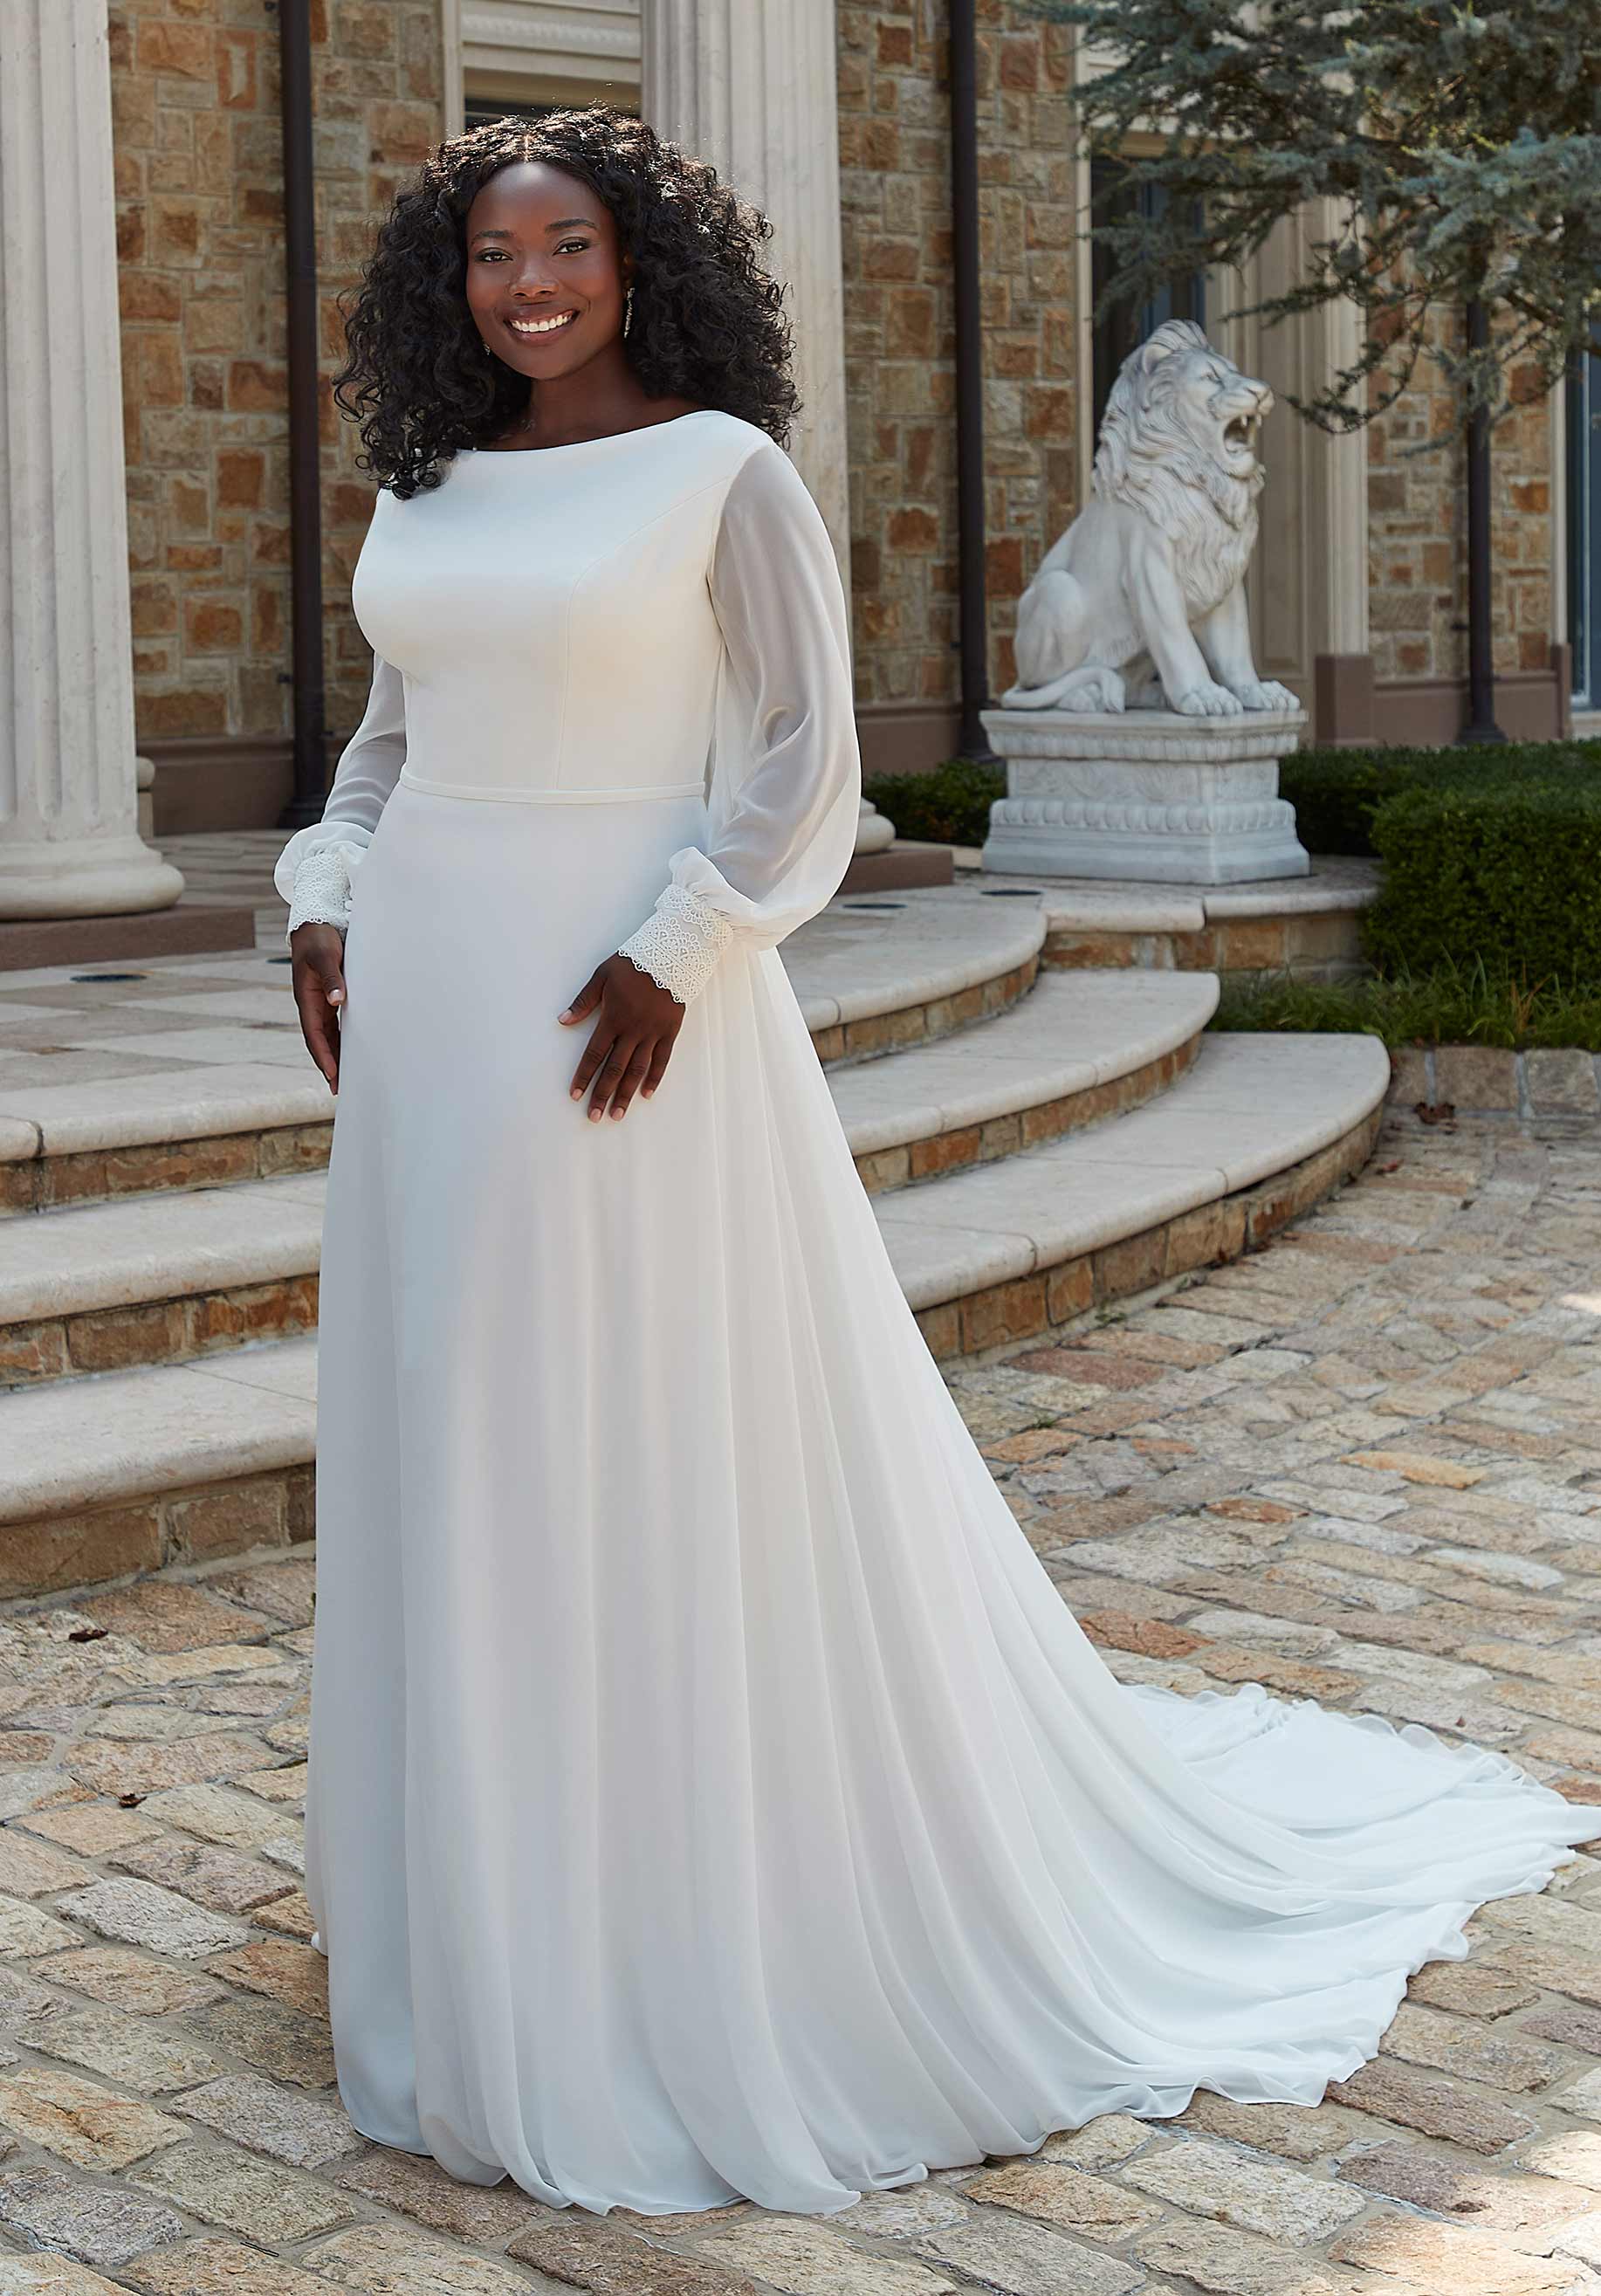 Plus-Size Wedding Dresses: How to Find the Gown of Your Dreams | Vogue